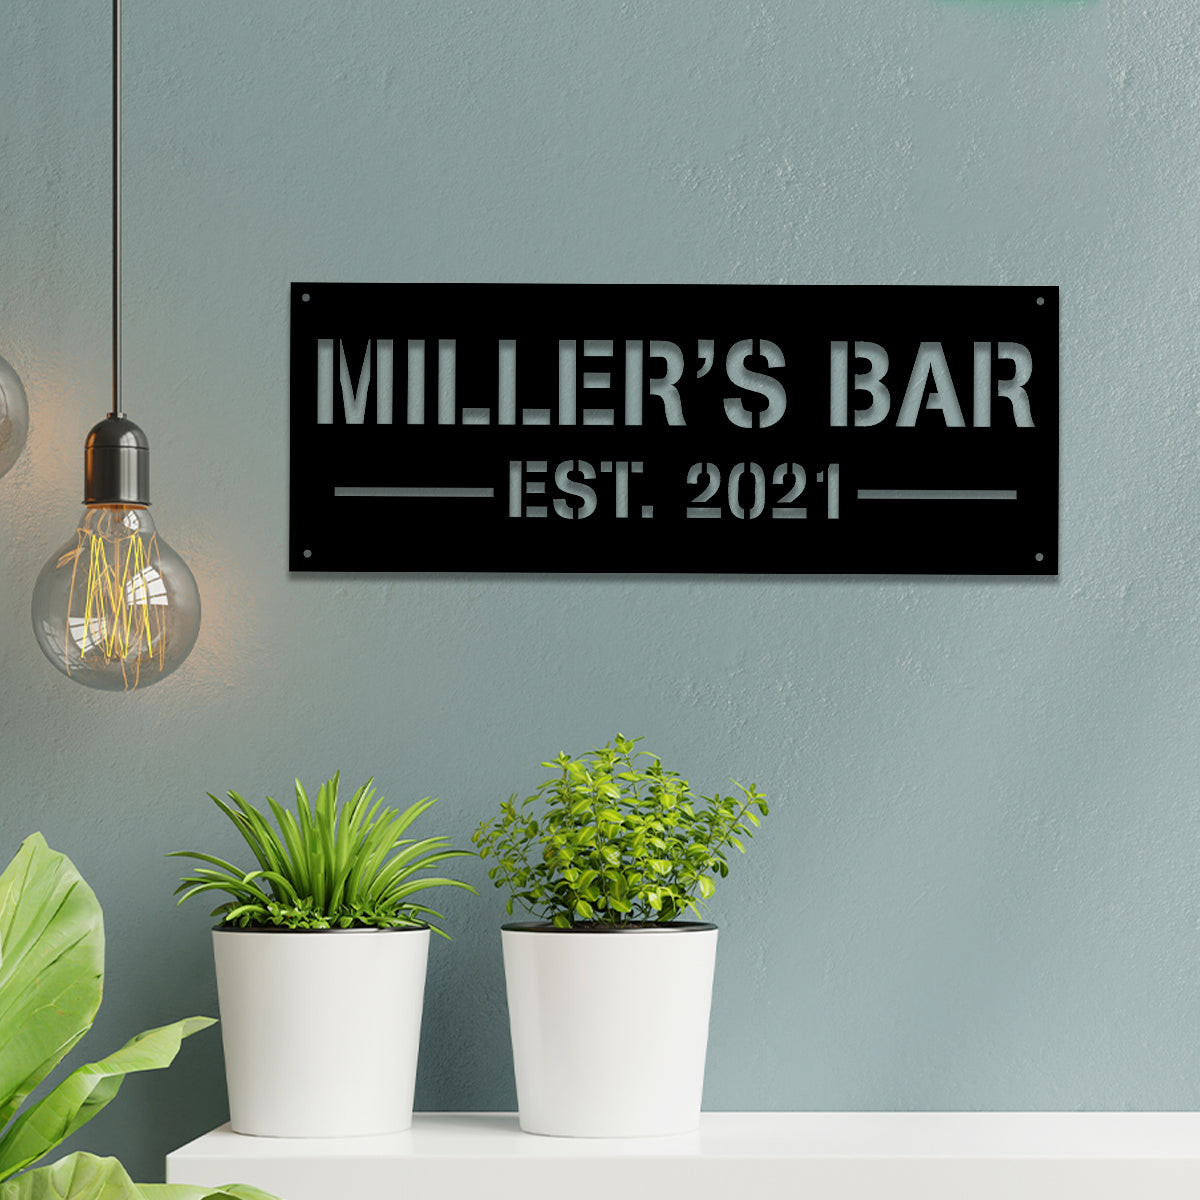 Personalized Metal Bar Sign, Pub, Tap, Lounge, Home Wall Decor, Wedding, Anniversary Art Gift For Him/her, Metal Laser Cut Metal Signs Custom Gift Ideas 14x14IN